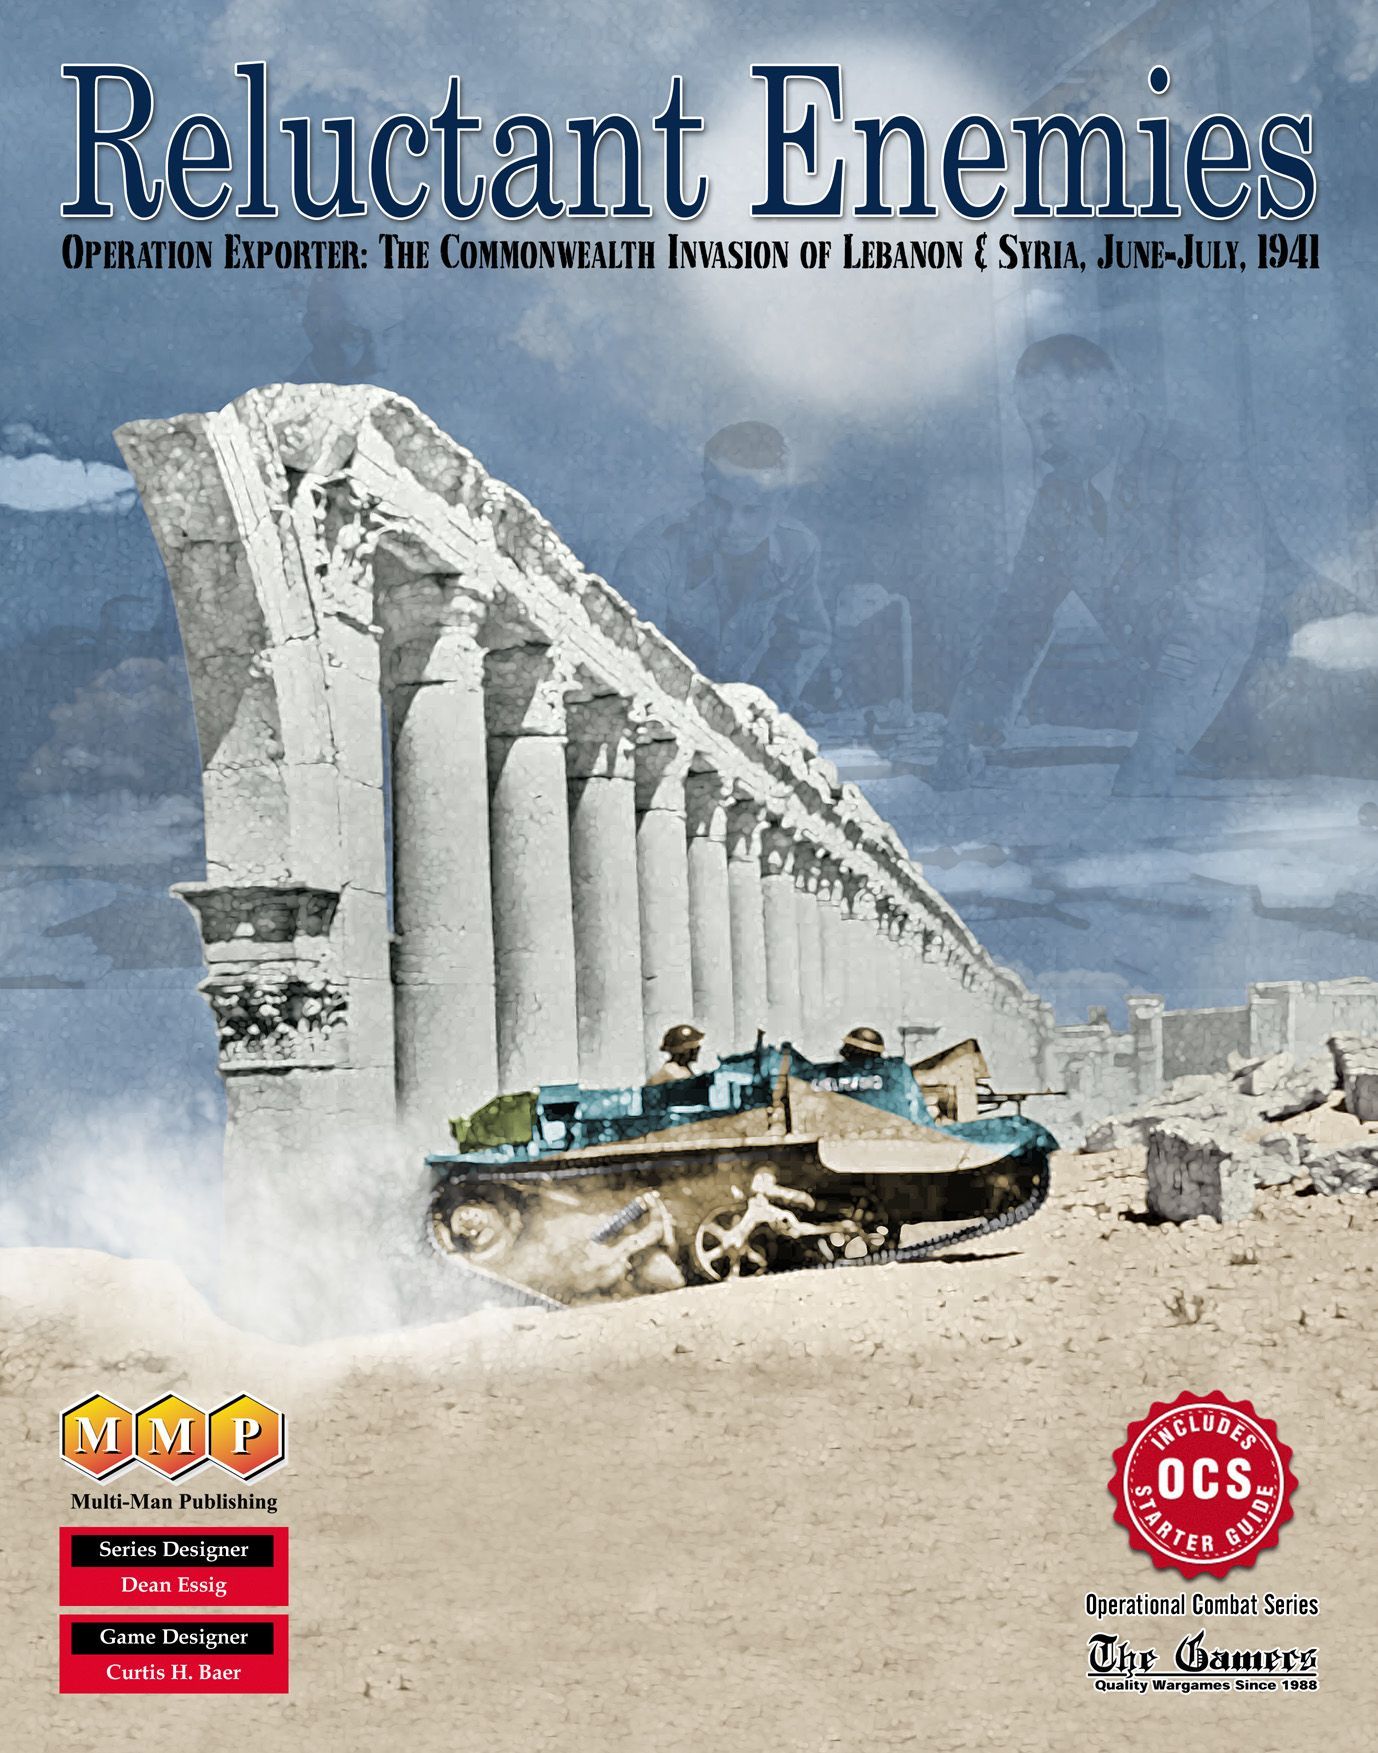 Reluctant Enemies: Operation Exporter – The Commonwealth Invasion of Lebanon & Syria, June-July, 1941